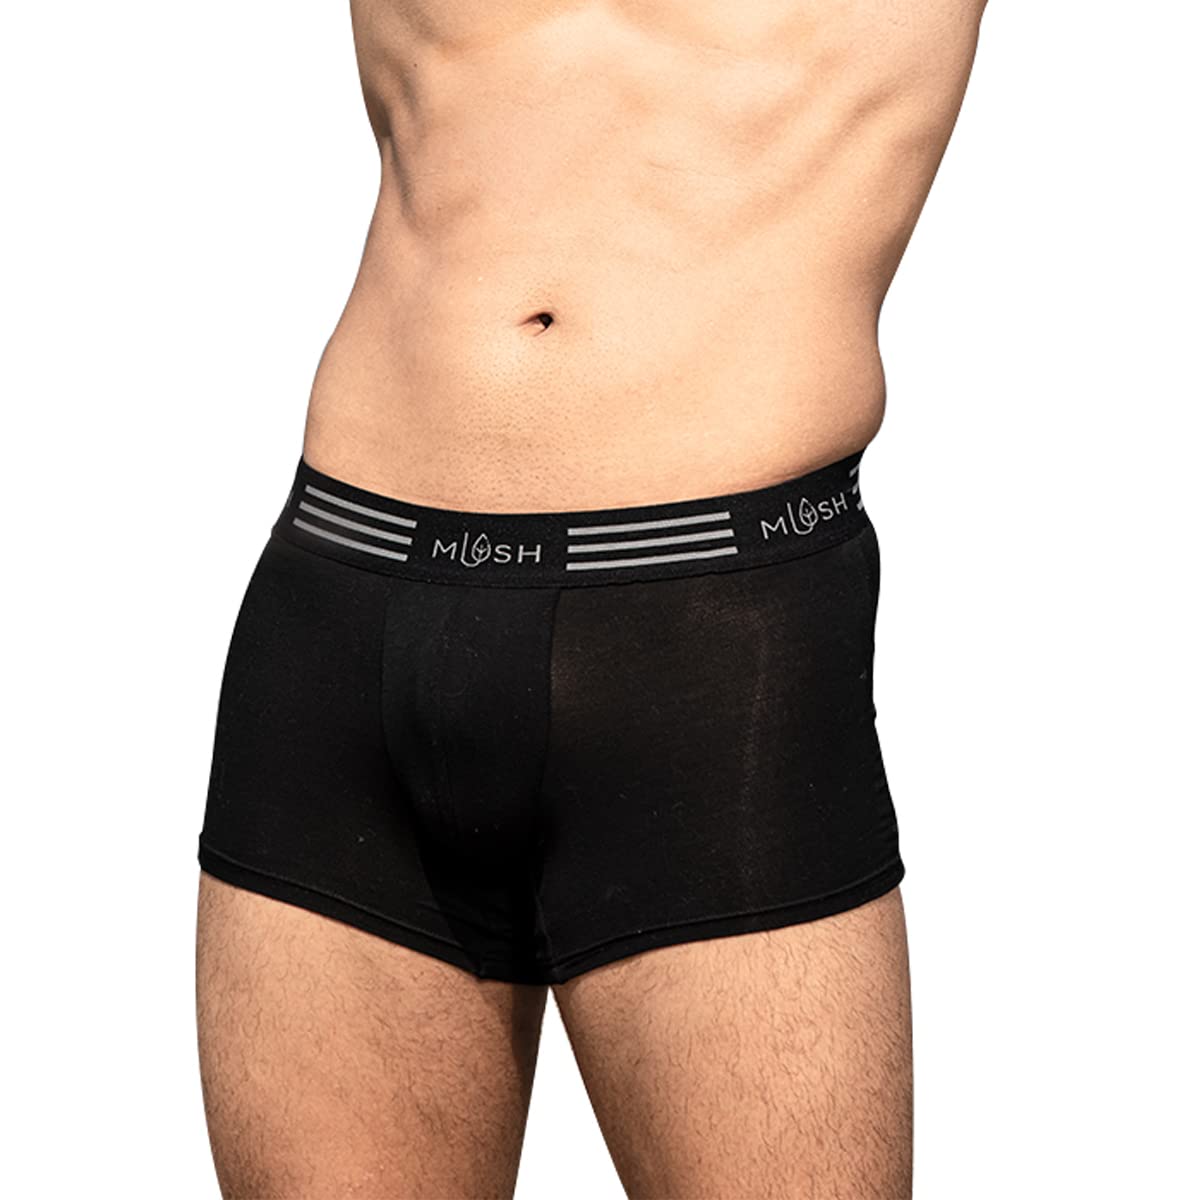 Mush Ultra Soft, Breathable, Feather Light Men's Bamboo Trunk || Naturally Anti-Odor and Anti-Microbial Bamboo Innerwear (XL, Black)